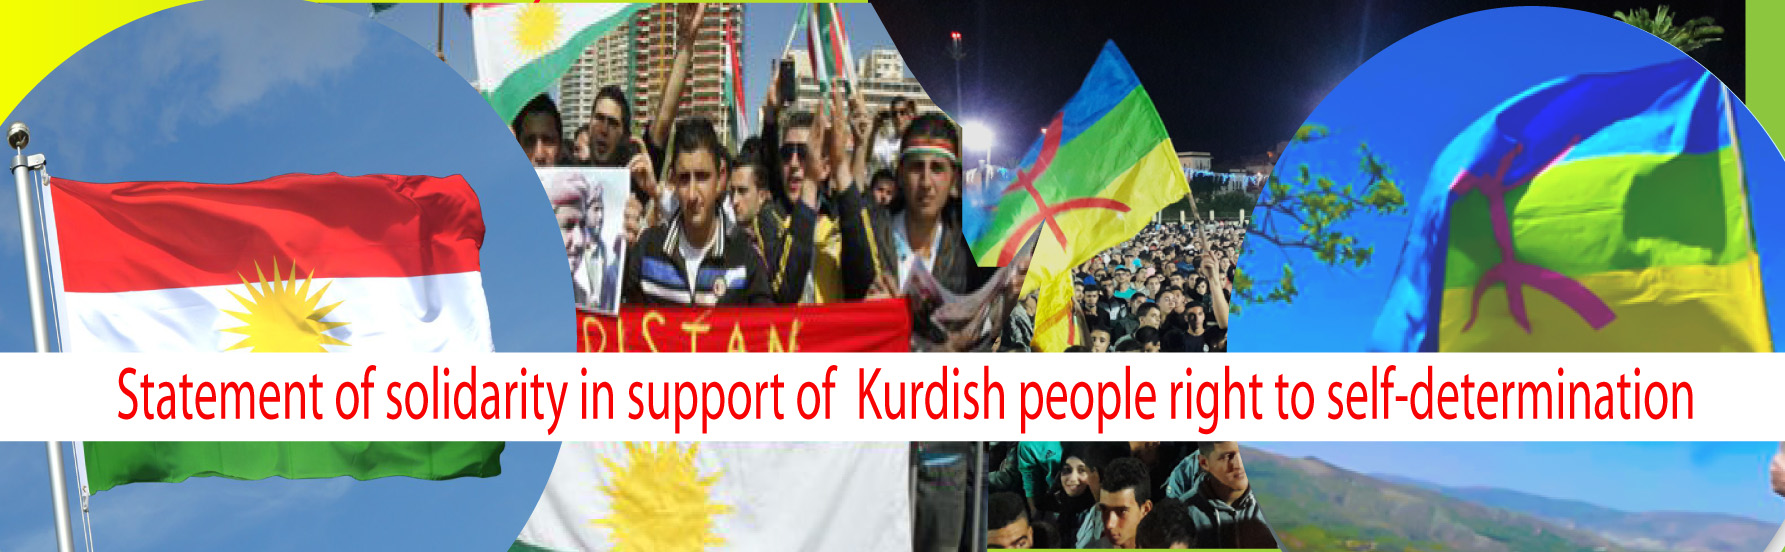 Statement of solidarity in support of  Kurdish people right to self-determination